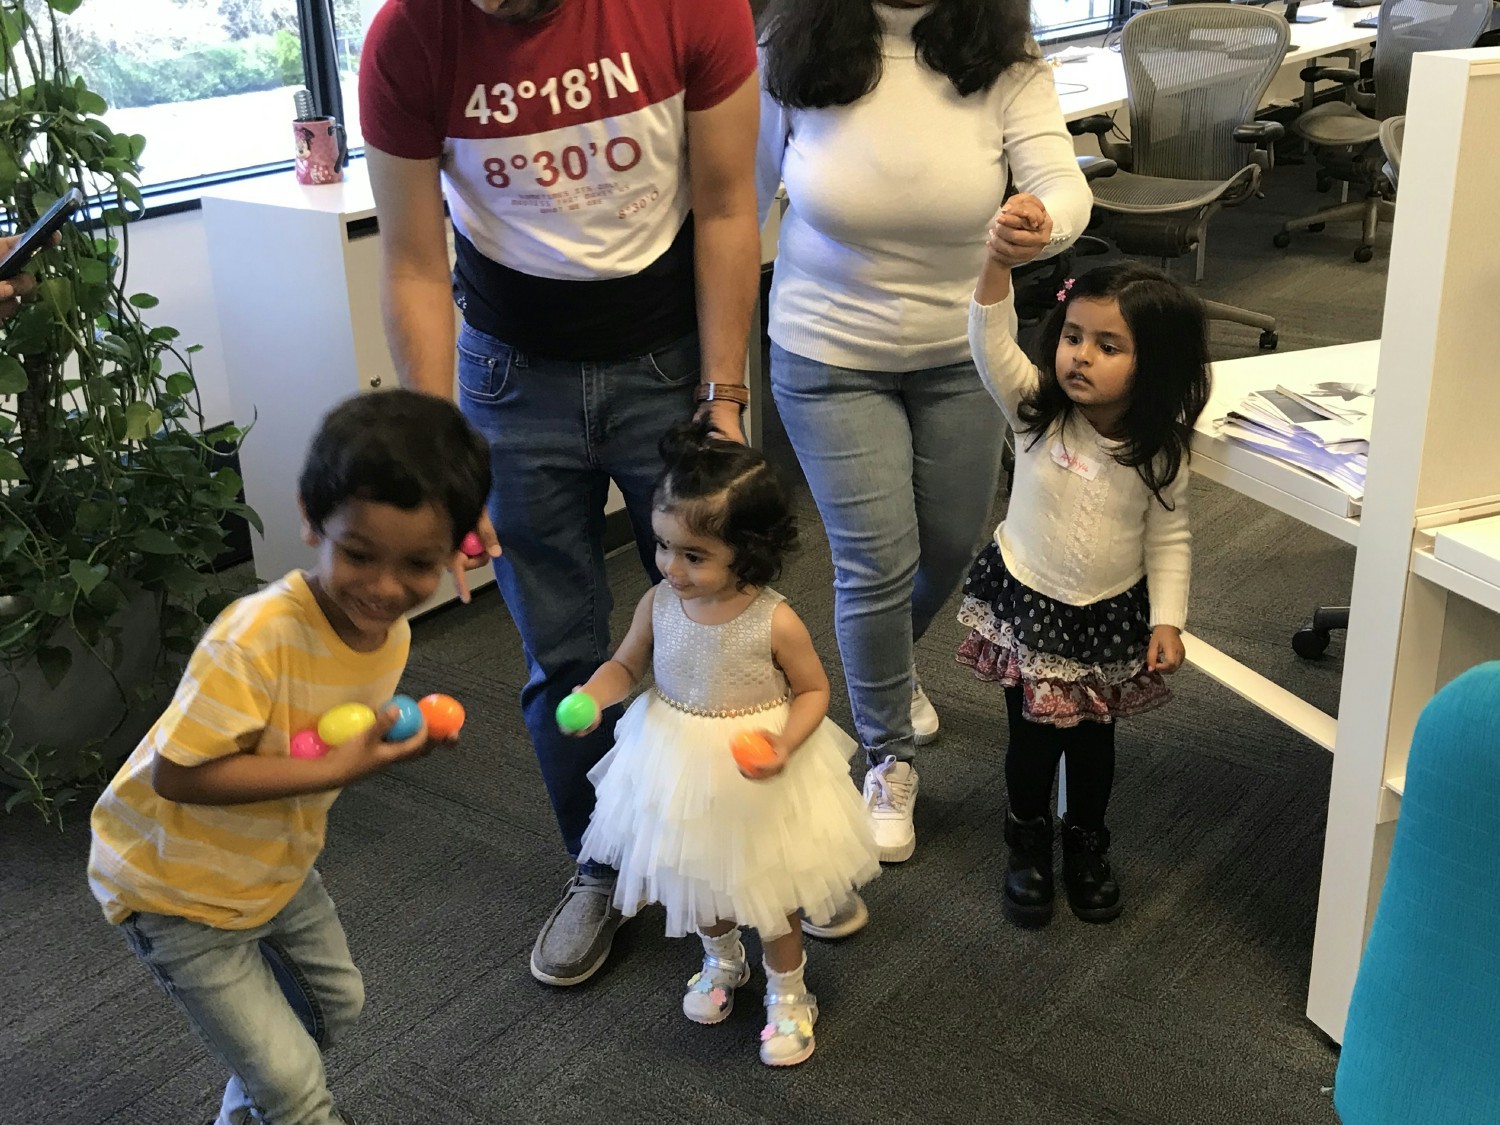 The kids have the most fun at the office. Especially with our Easter events.